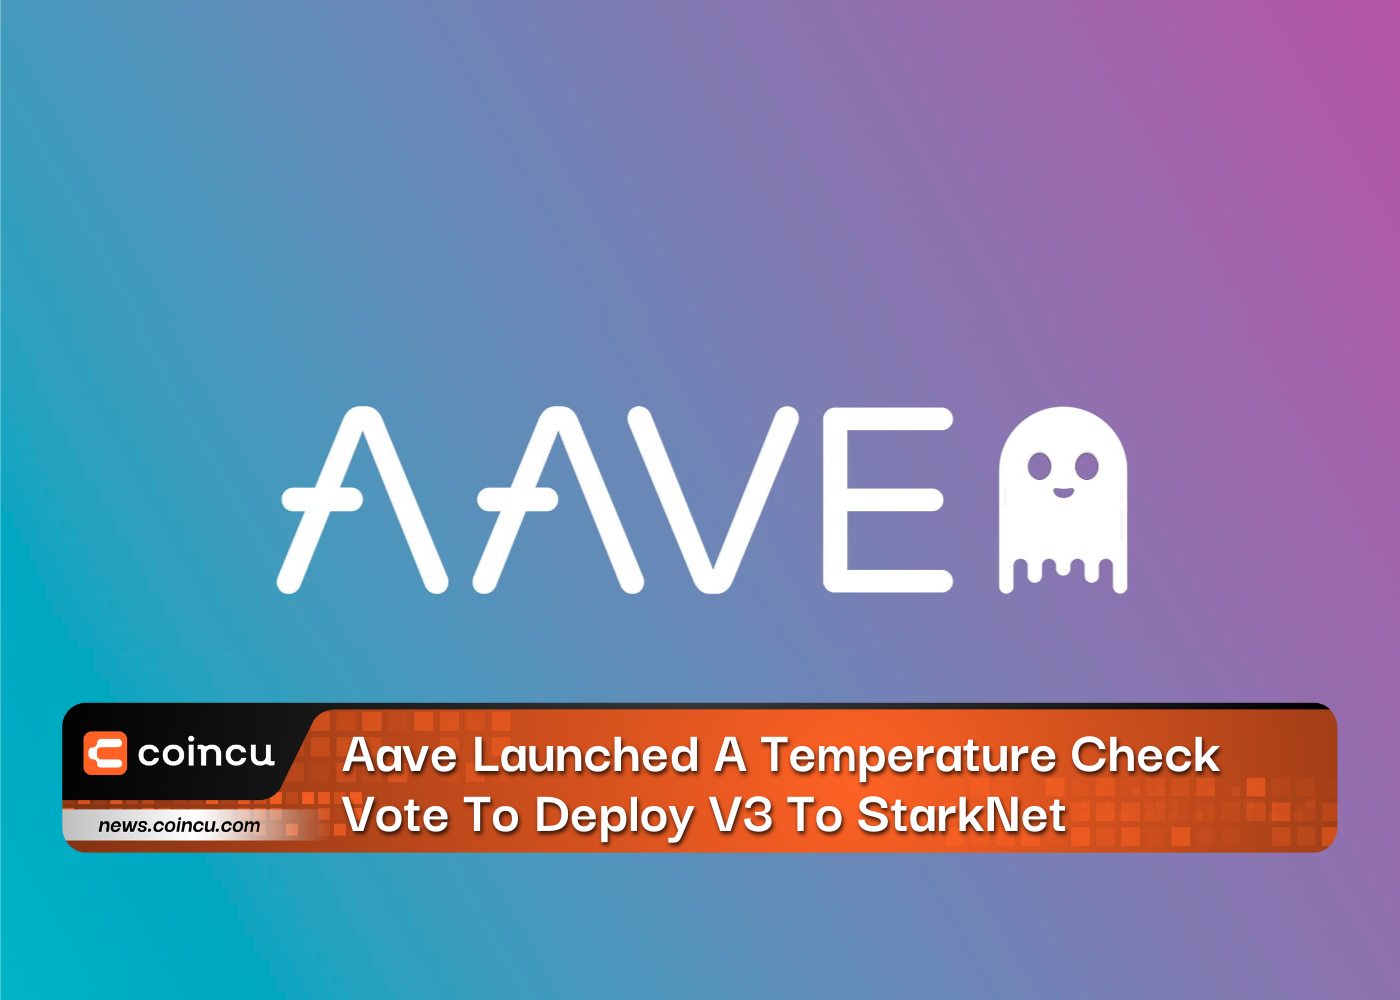 Aave Launched A Temperature Check Vote To Deploy V3 To StarkNet